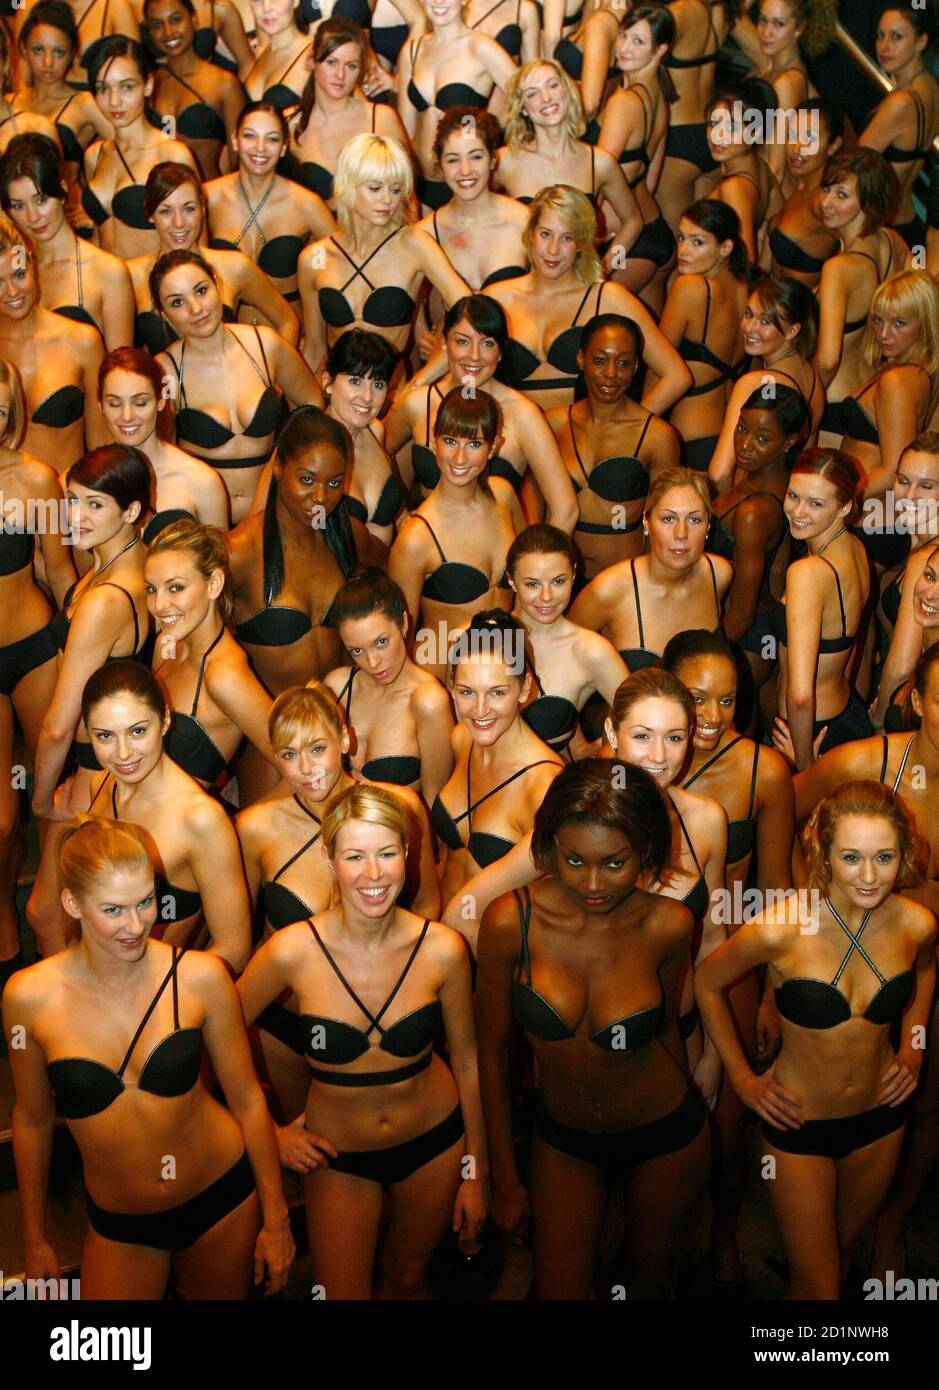 One hundred girls pose wearing the new Wonderbra Multiplunge bra in the  National Portrait Gallery in London November 16, 2006. REUTERS/Stephen Hird  (BRITAIN) BEST QUALITY AVAILABLE Stock Photo - Alamy